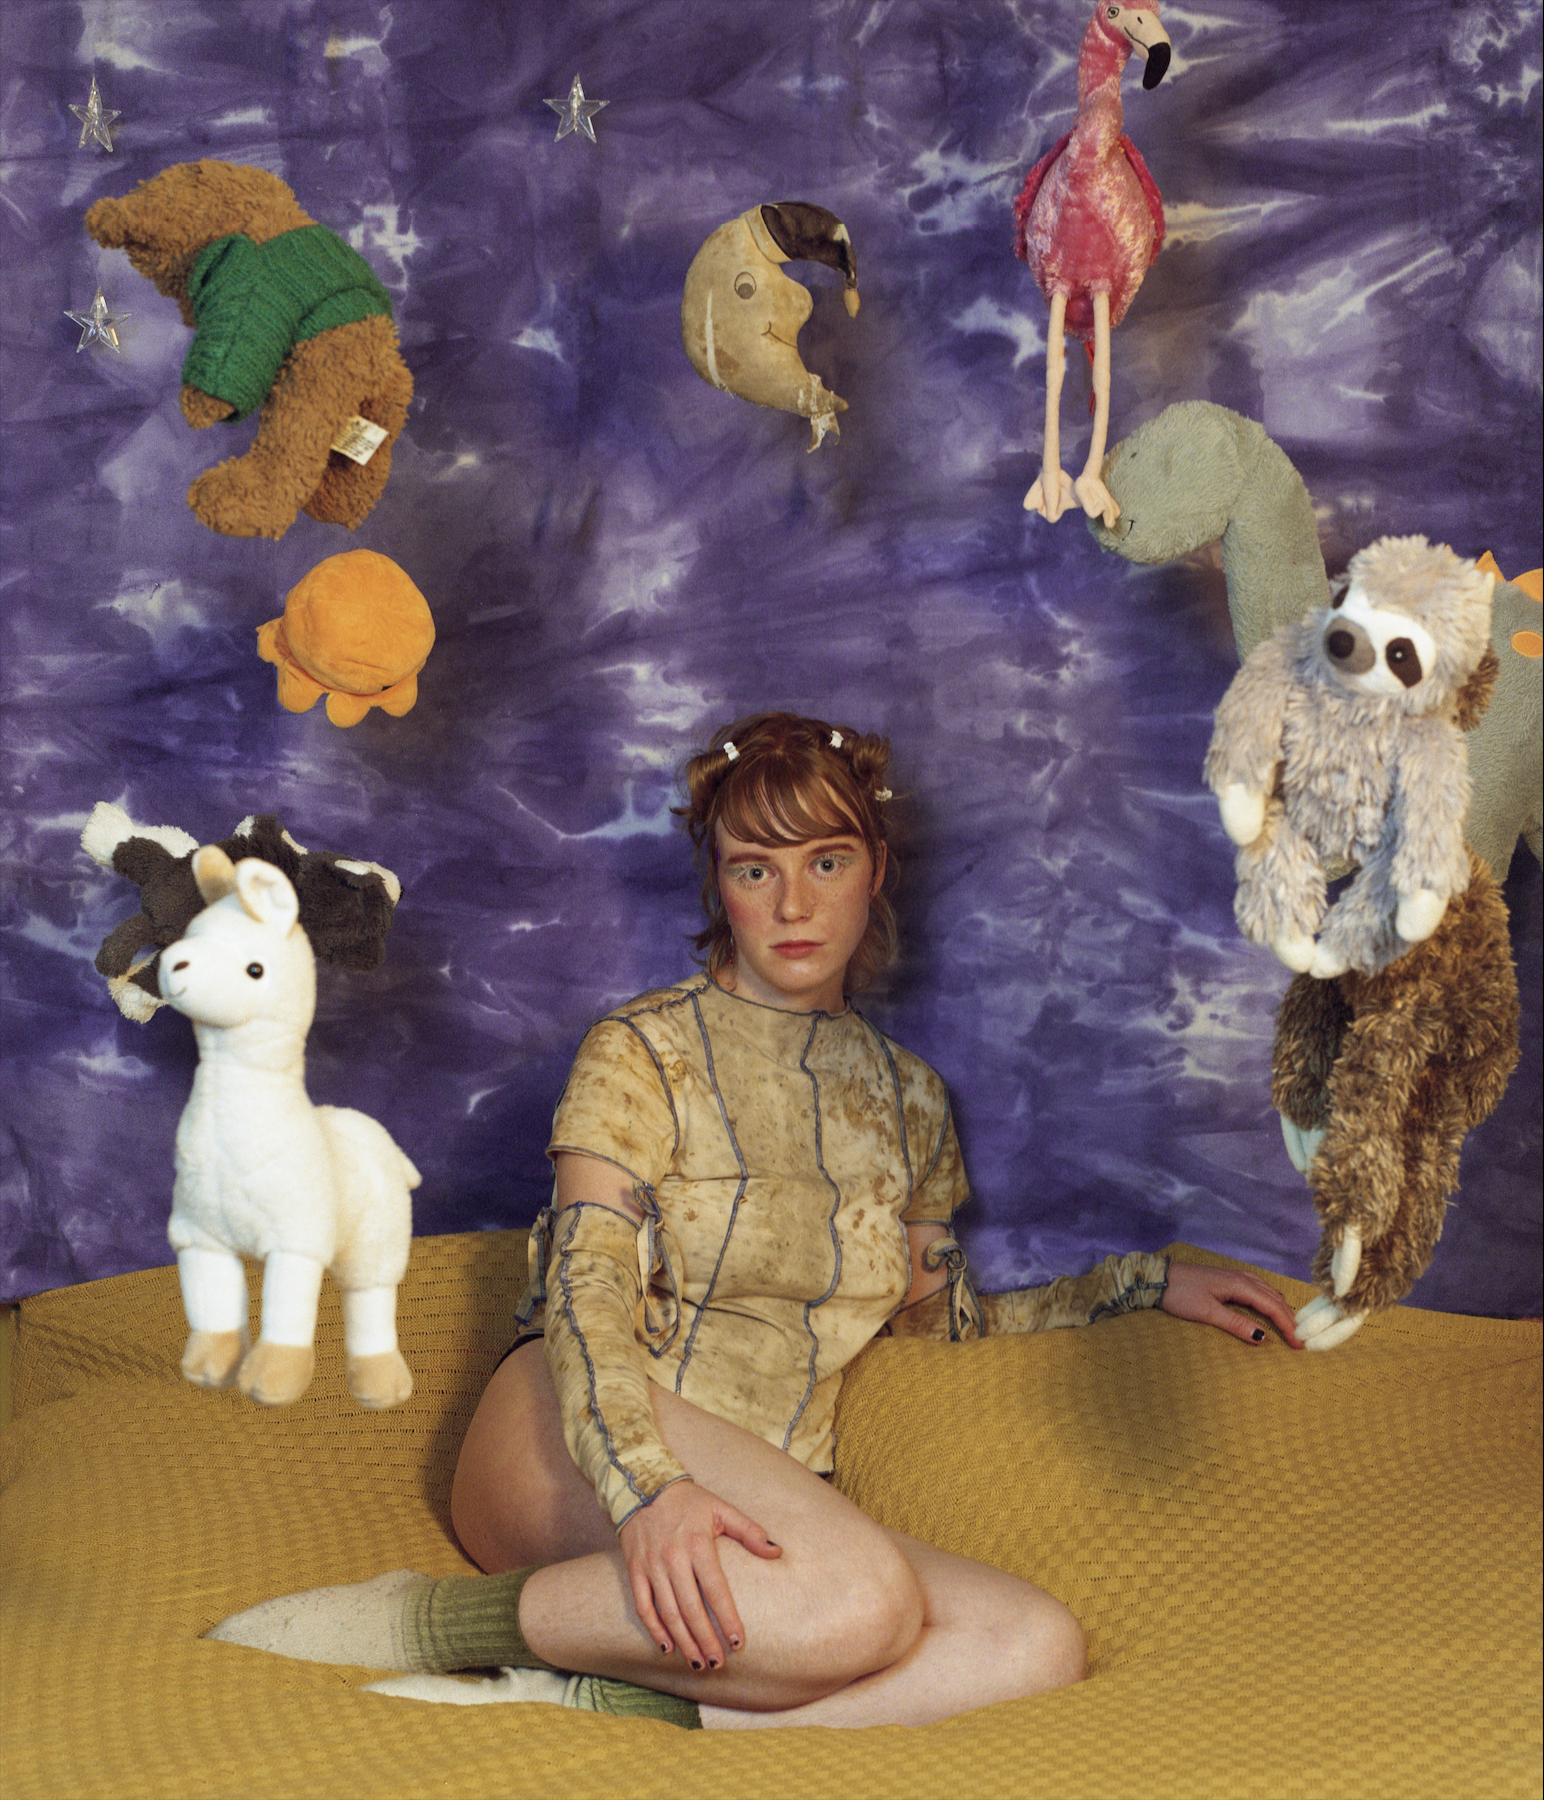 Flo Verhulst – young person wearing a Y2K inspired top, underwear and socks and sitting on a bed, surrounded by stuffed animals floating in the air. Background: a blue tie-dye sheet